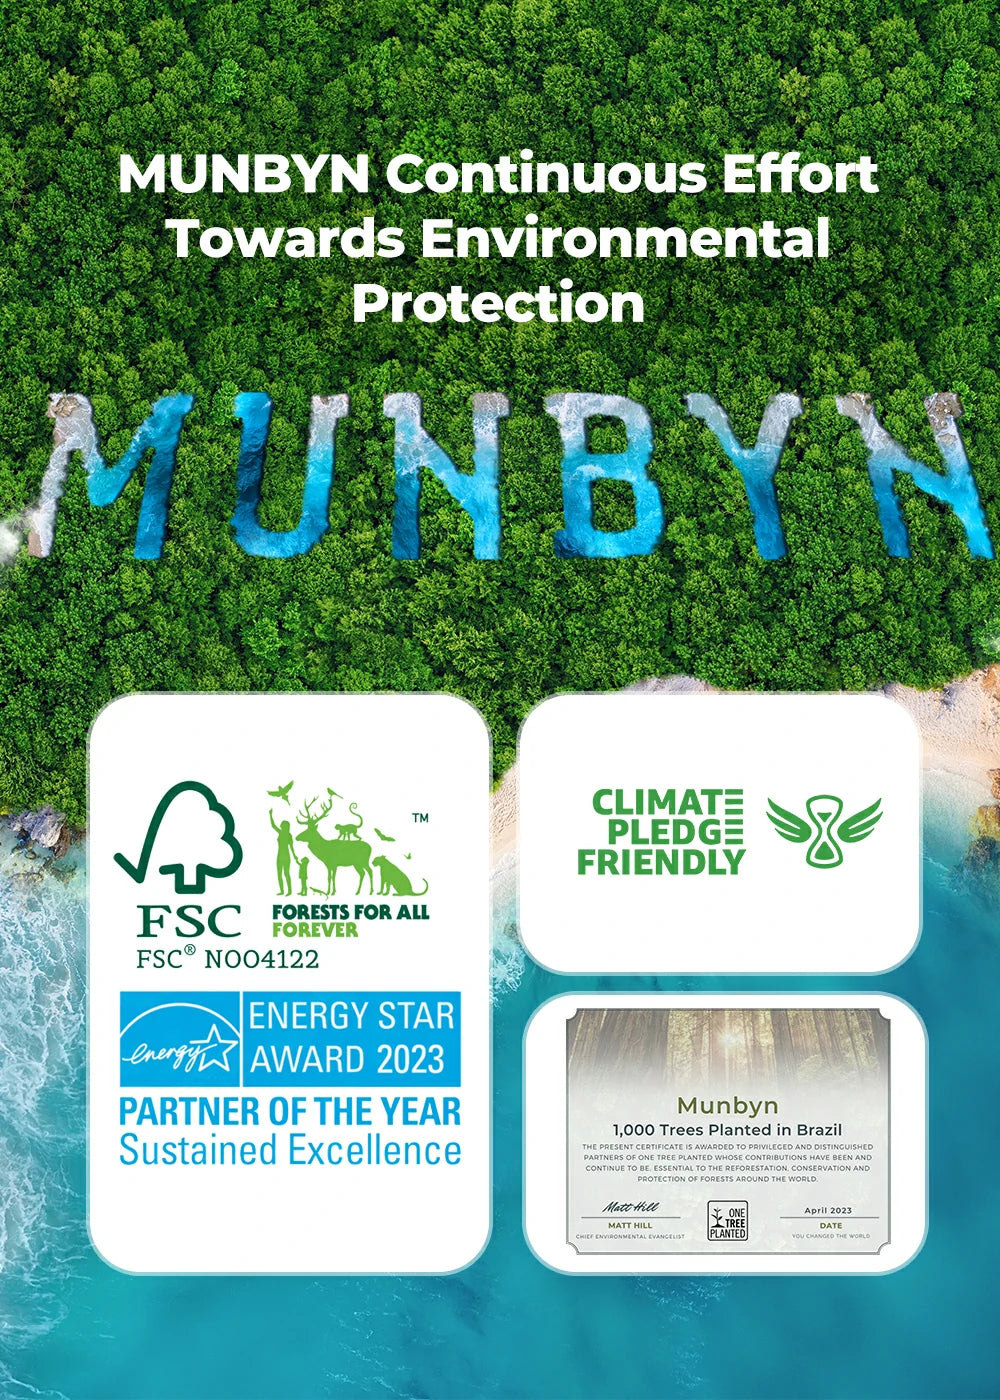 MUNBYN contributes to environmental protection and has been certified by renowned environmental organizations.